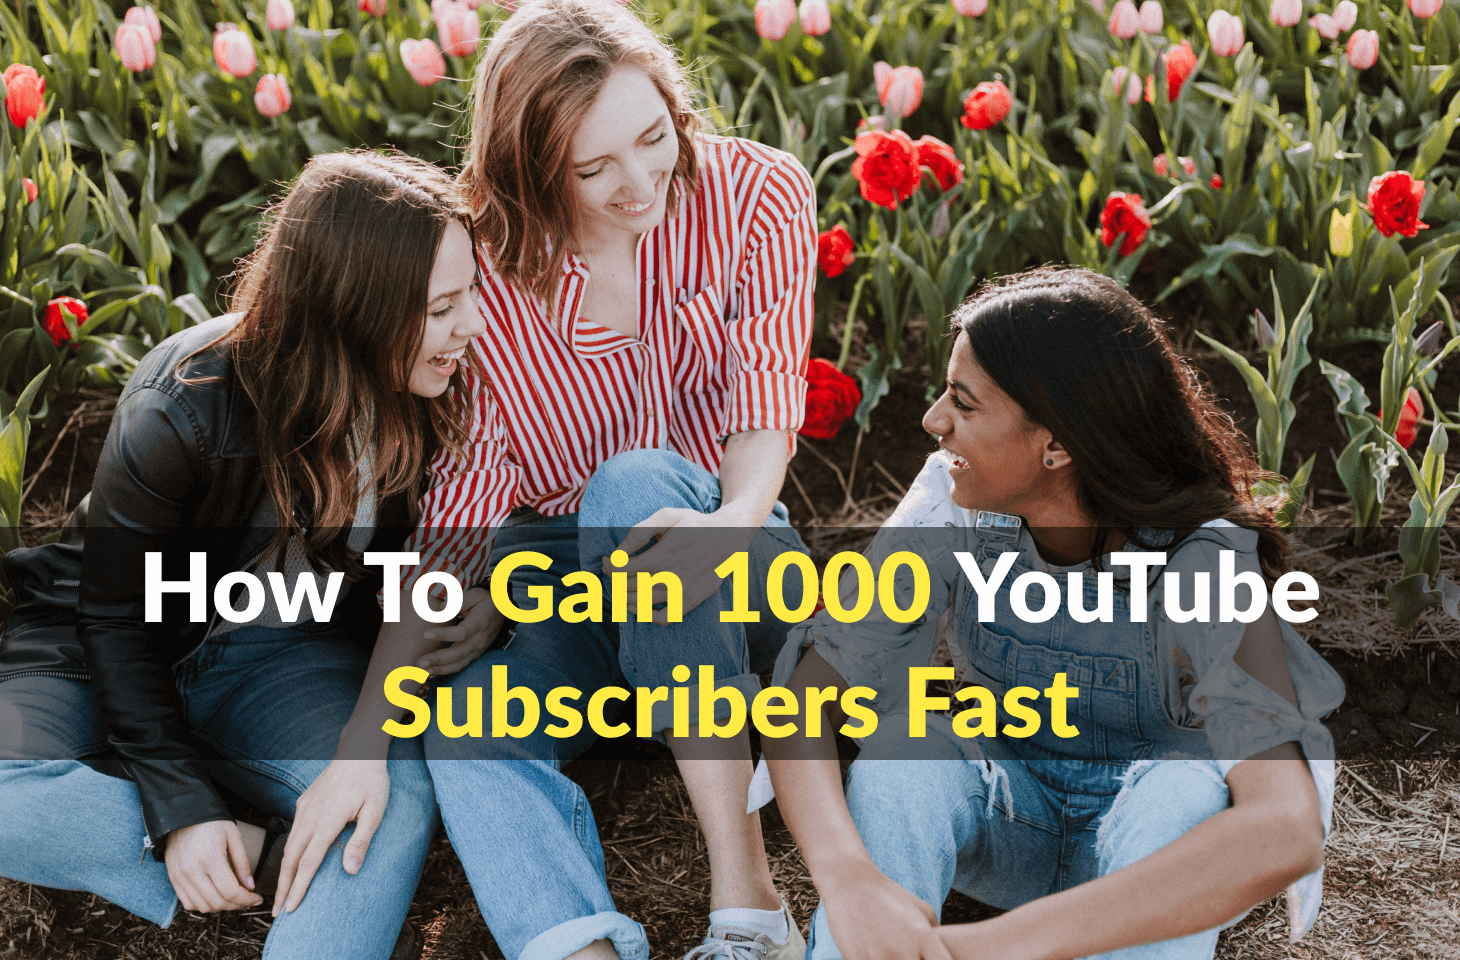 How To Gain 1000 Subscribers Fast